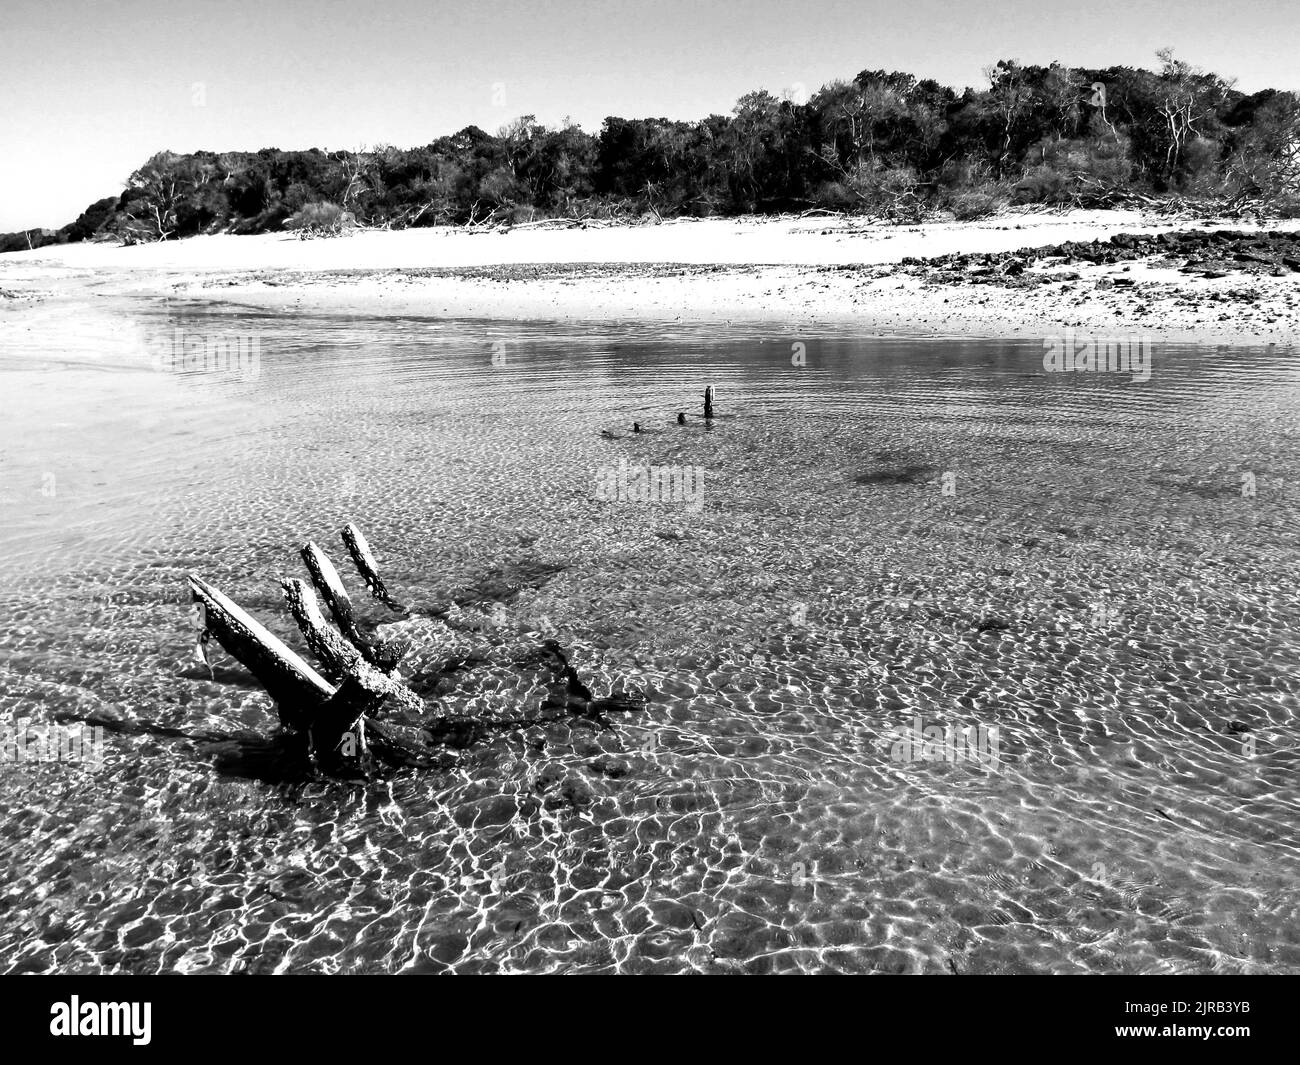 An old wreck of a dhow, which sunk in the shallow water surrounding the Inhaca Barrier Island of the coast of Mozambique in black and white. Stock Photo